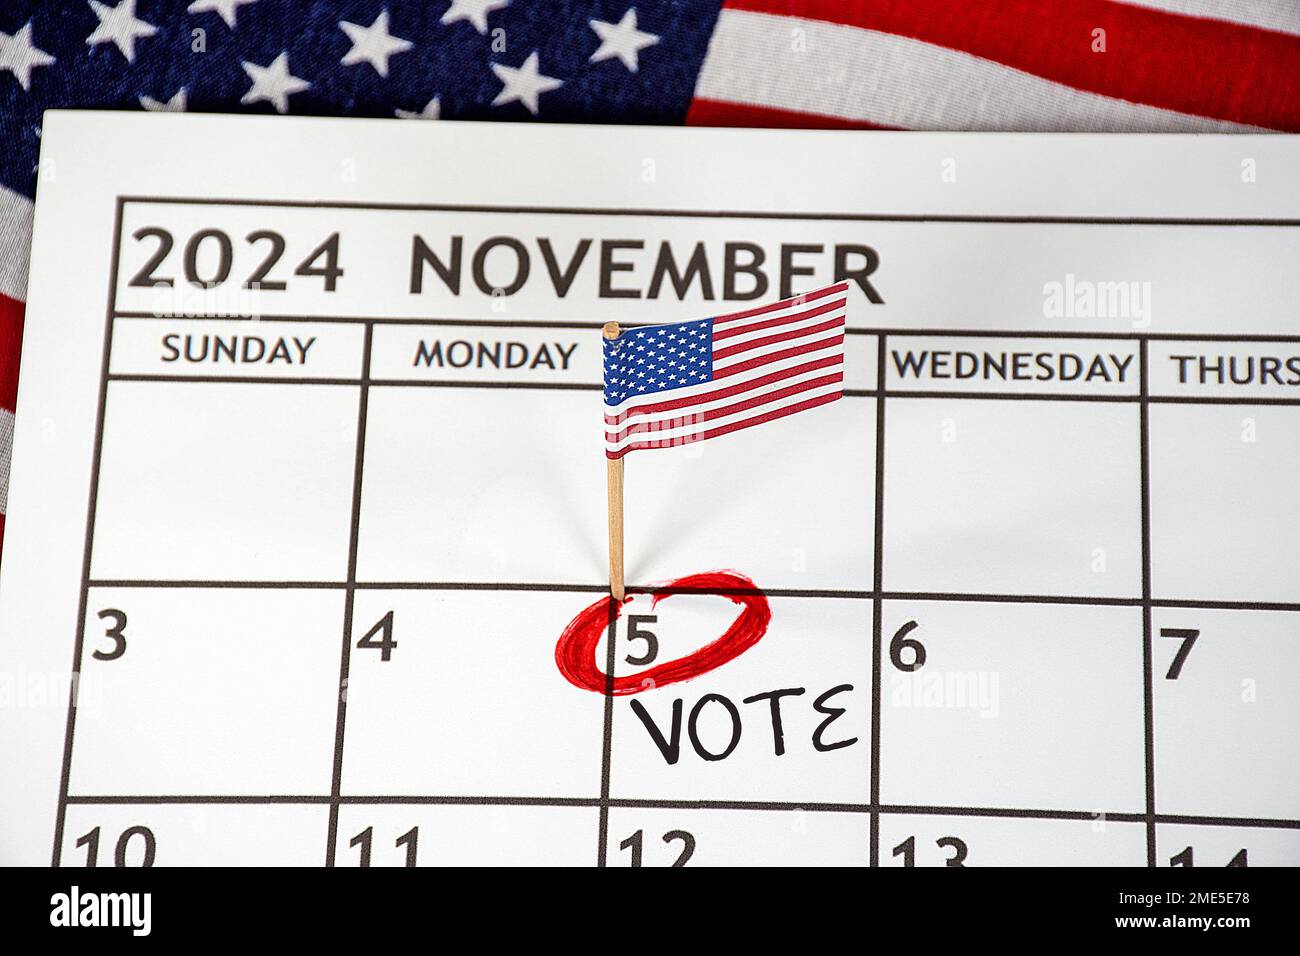 American flag and a red circle on November 5 Presidential Election Day 2024 Stock Photo